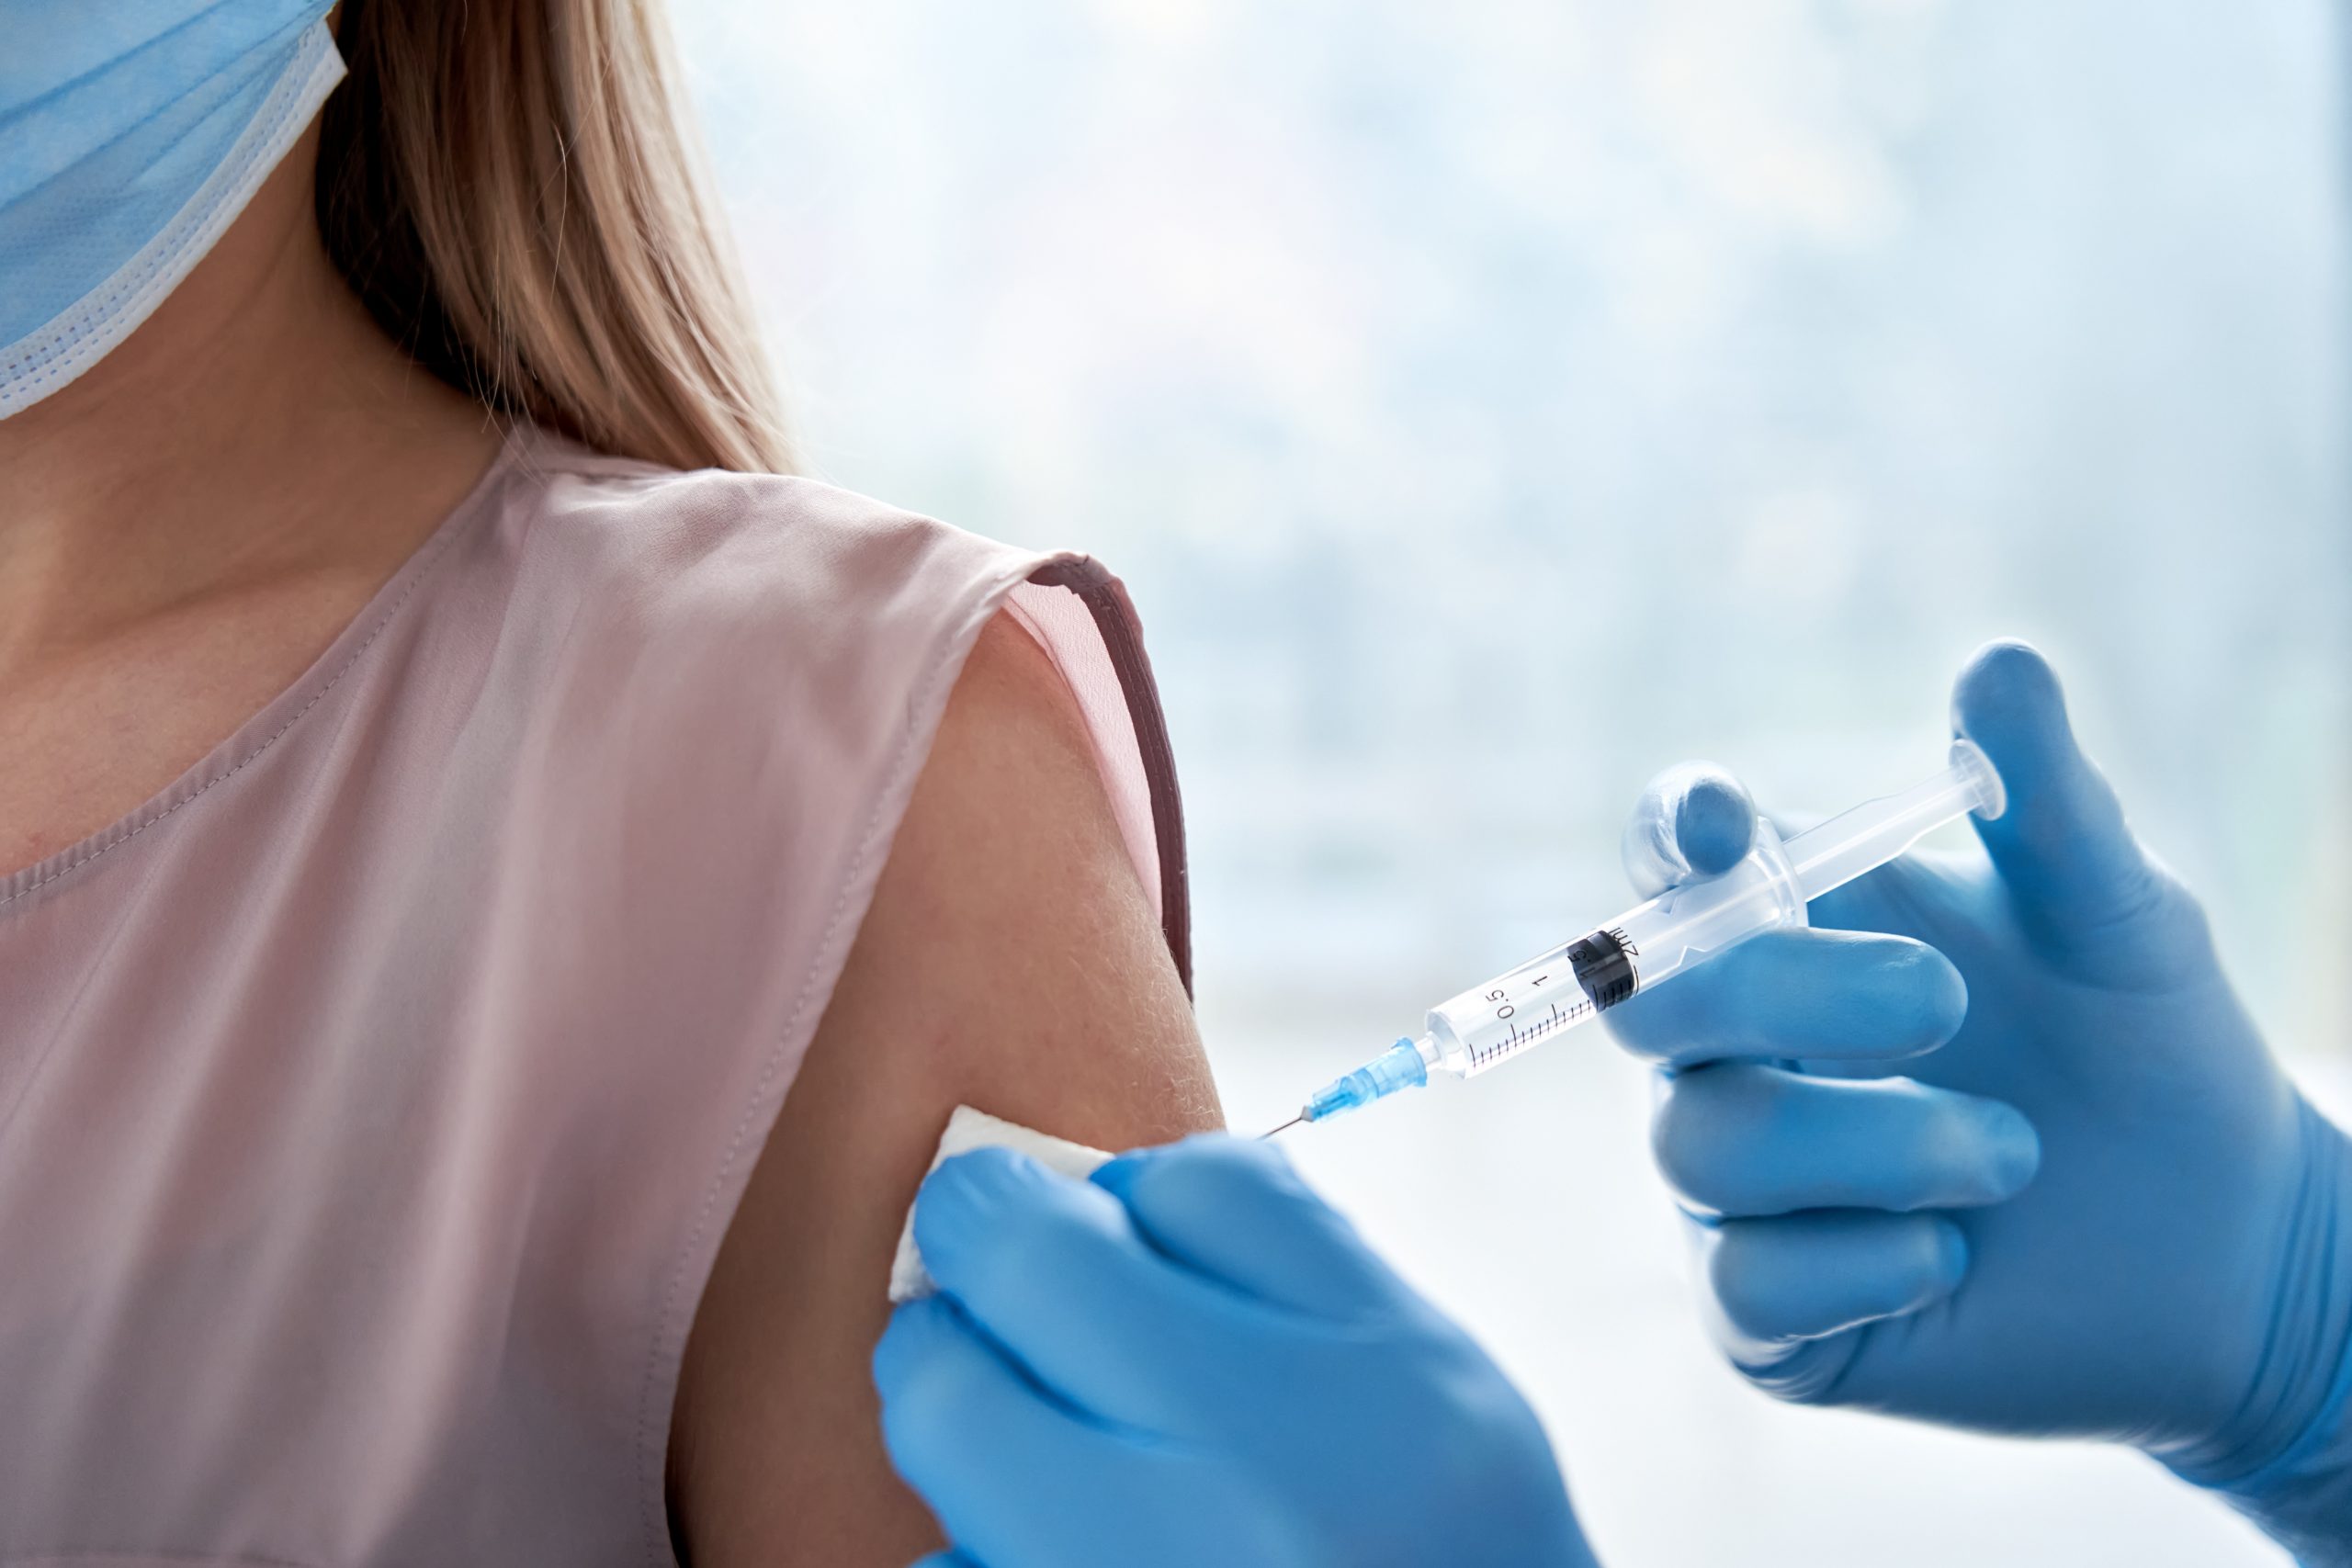 An image of a woman being injected with a COVID vaccine by a doctor wearing blue sterile gloves. Only the woman’s shoulder and neck are visible. She has white skin, blonde hair and is wearing a light pink, sleeveless blouse.